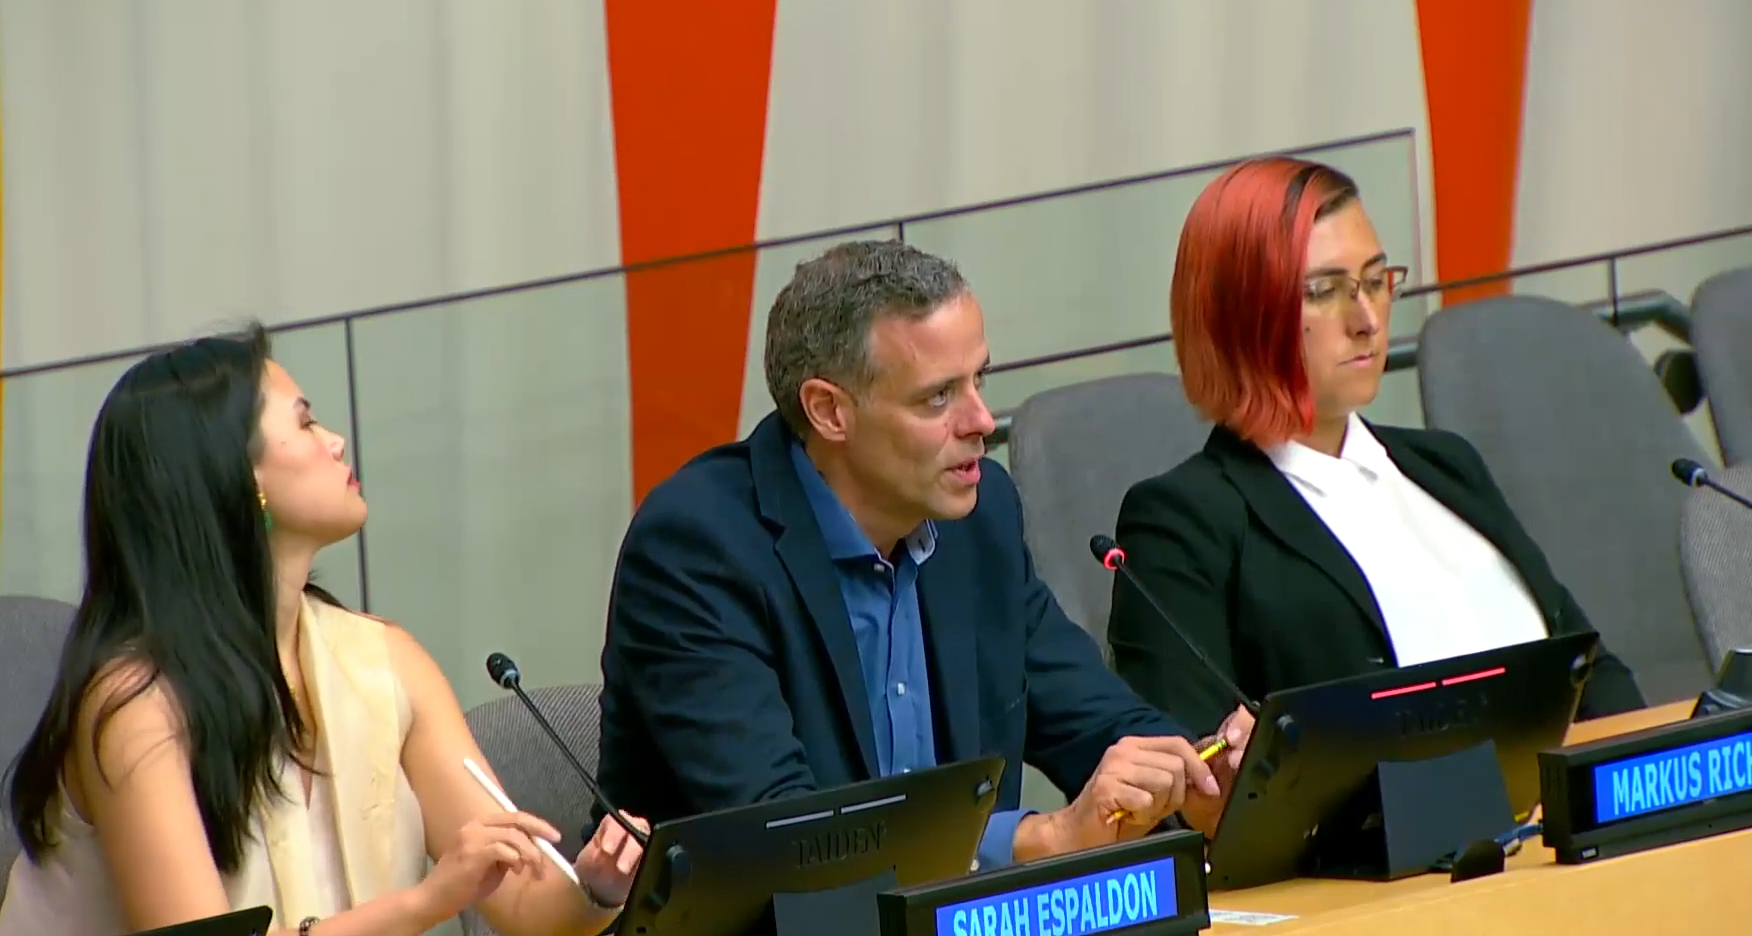 Three people in a panel, the middle person is speaking